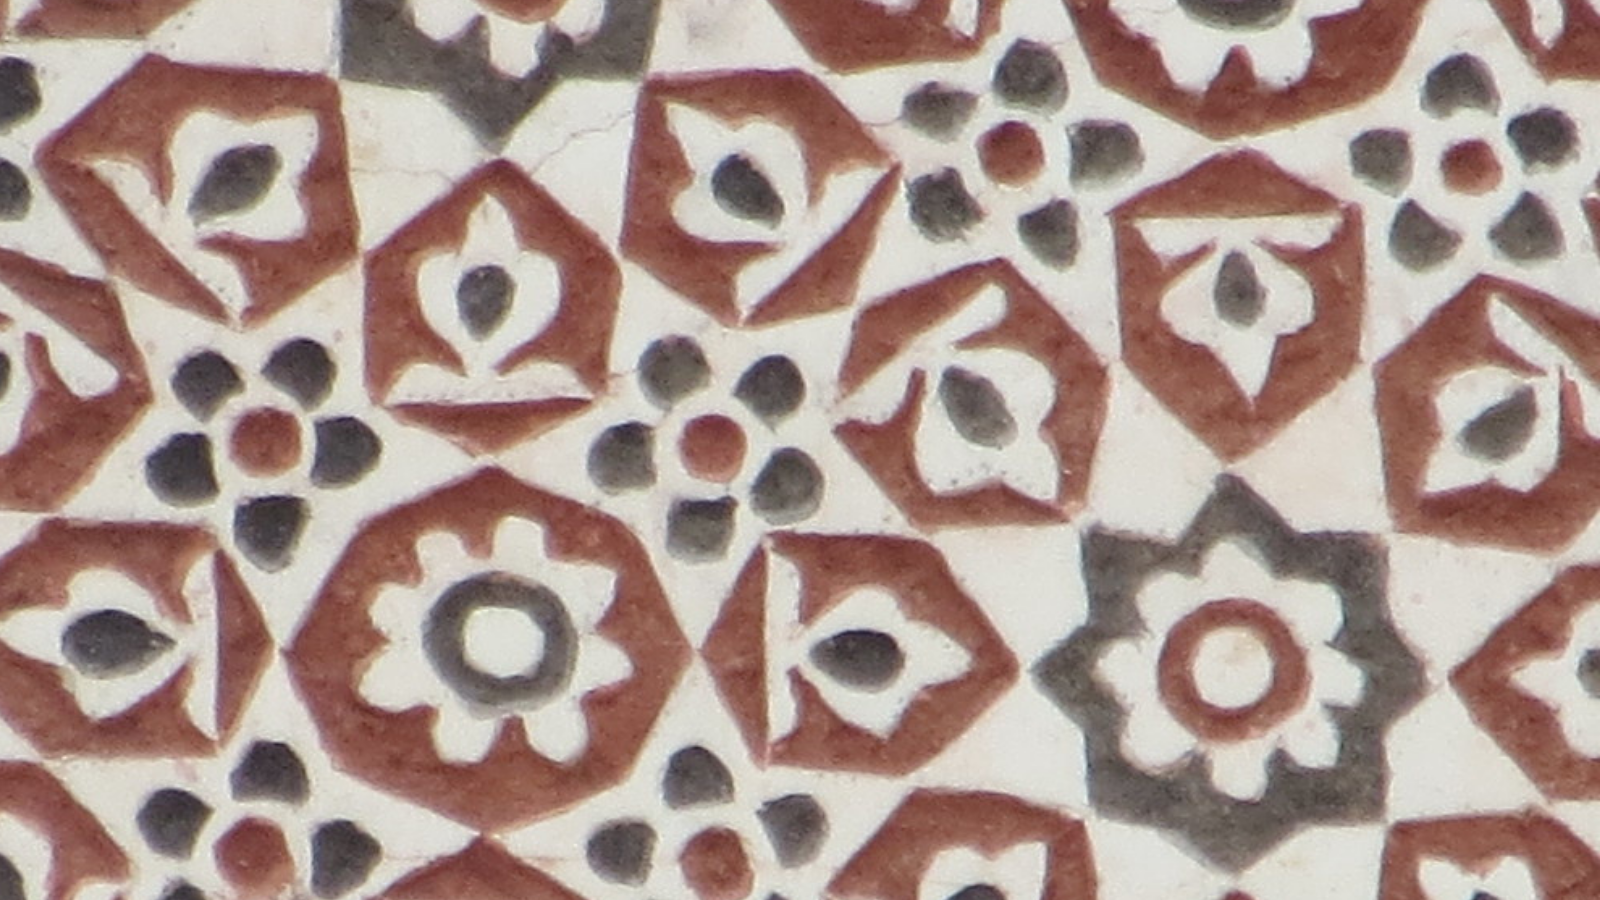 Plaster detail from inside the 16th century Batashewala Mughal Tomb Complex in Delhi, India. (Photo courtesy of the Cultural Heritage Center)